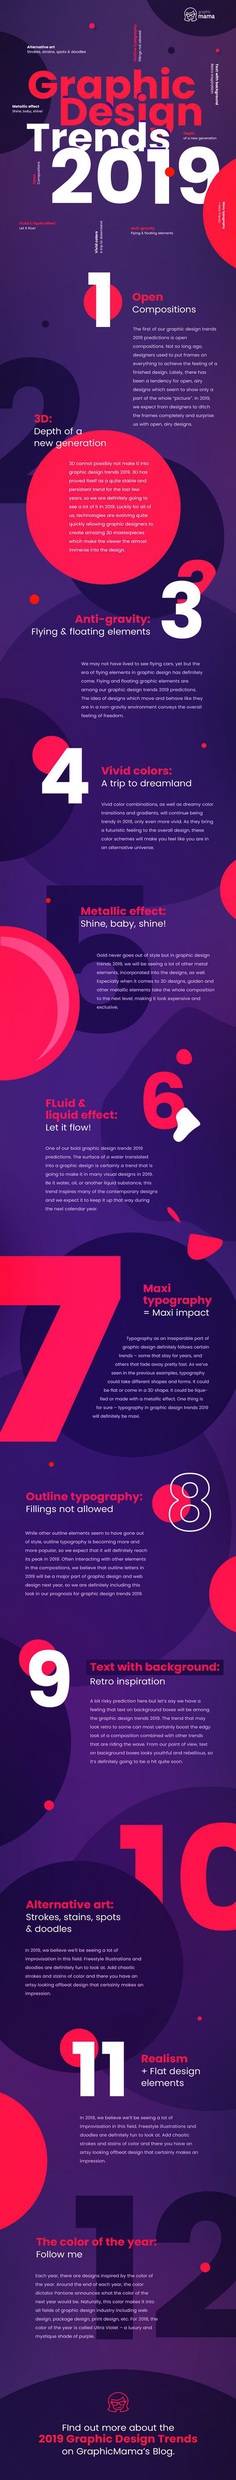 Top Graphic Design Trends 2019: Fresh Hot & Bold